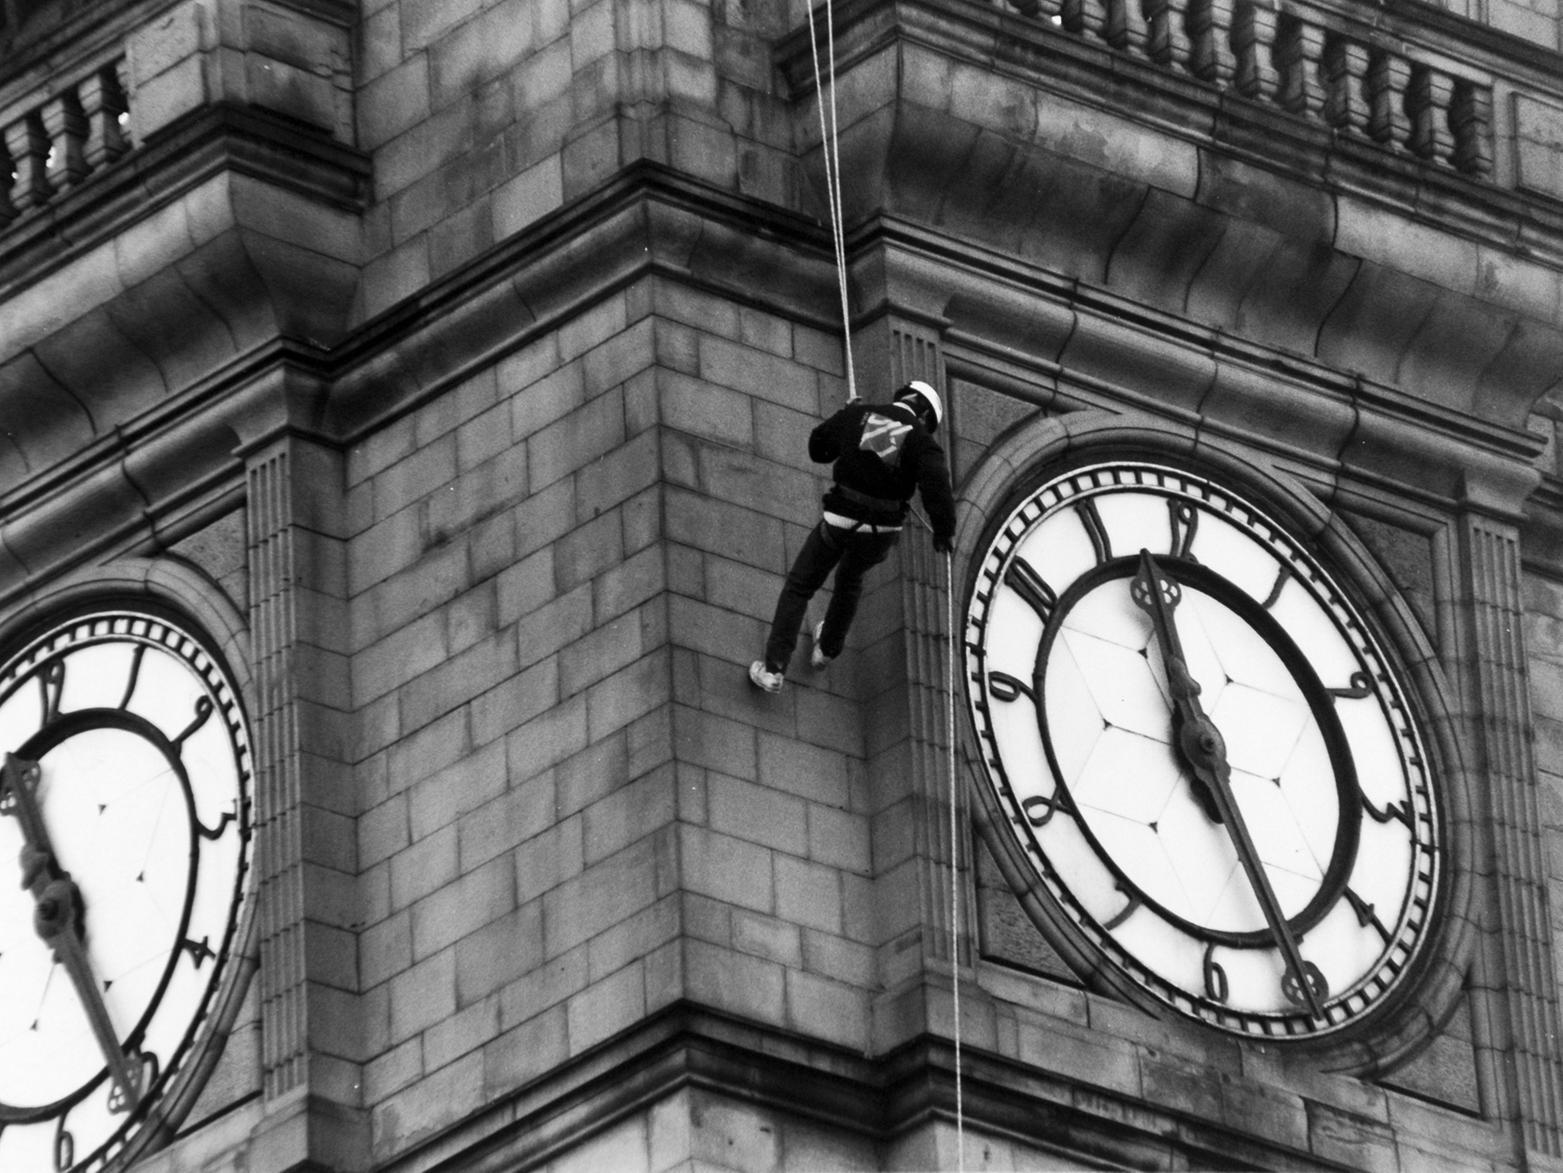 Simon Young abseils down Leeds Town Hall clock tower, aiming to raise public awareness of local youth activity.